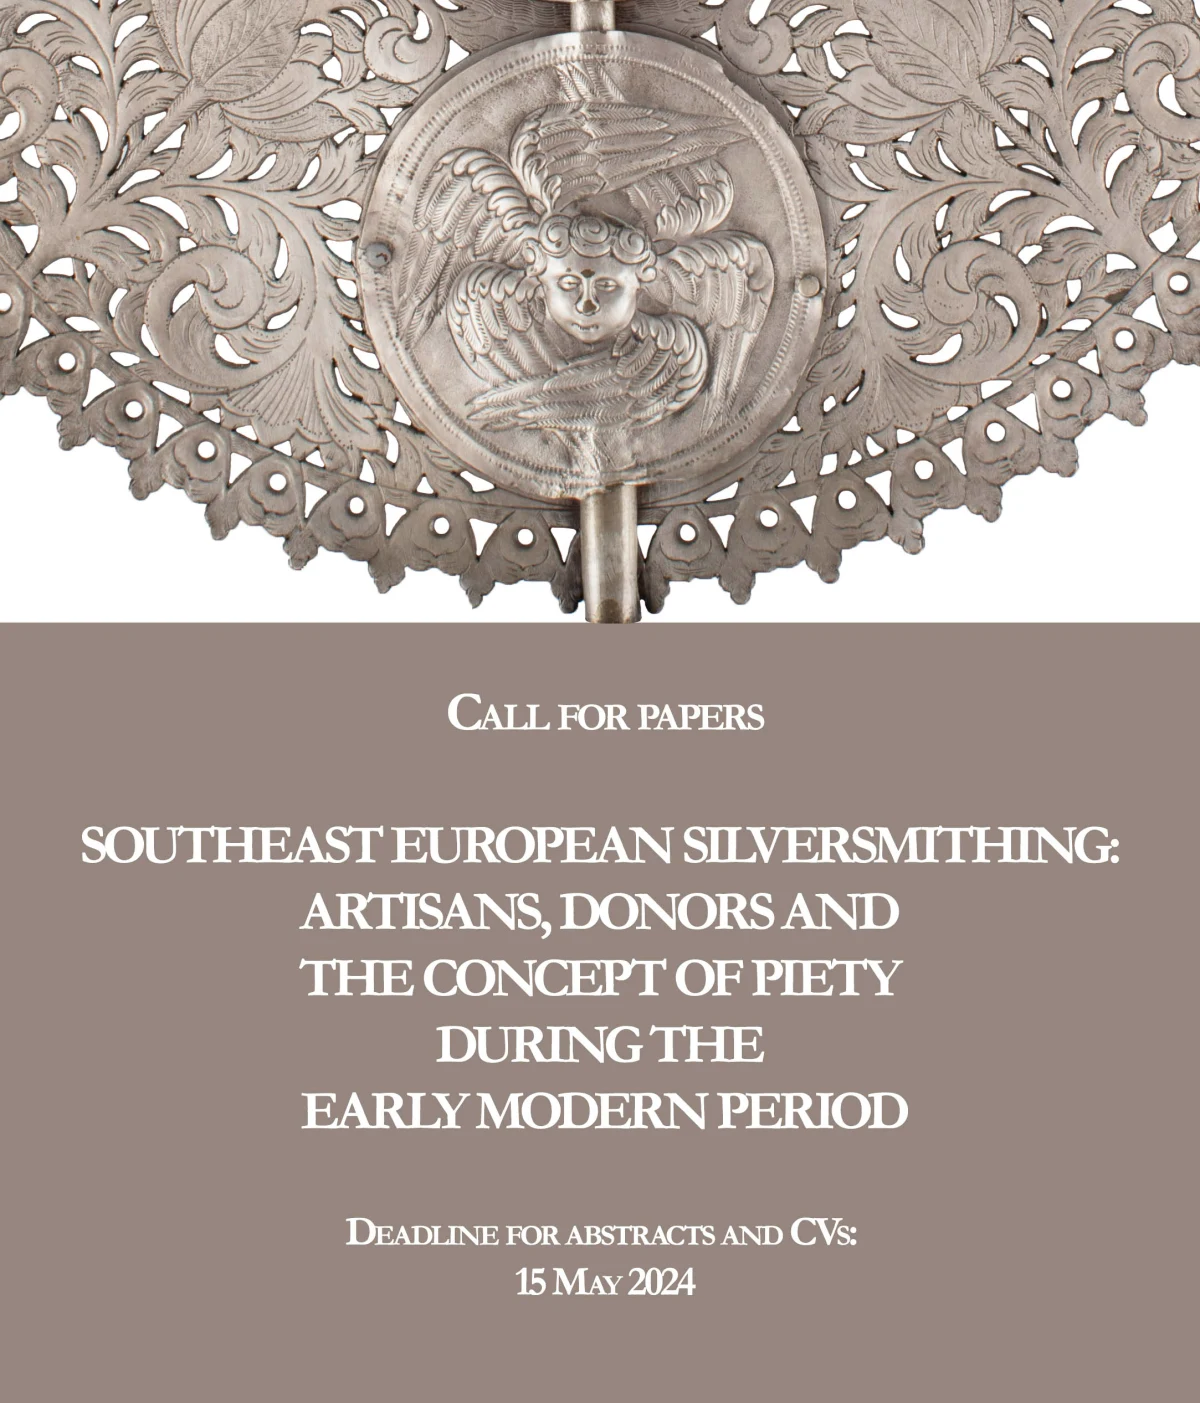 CFP: ‘Southeast European Silversmithing: Artisans, Donors And The Concept Of Piety During The Early Modern Period’, deadline 15 May 2024